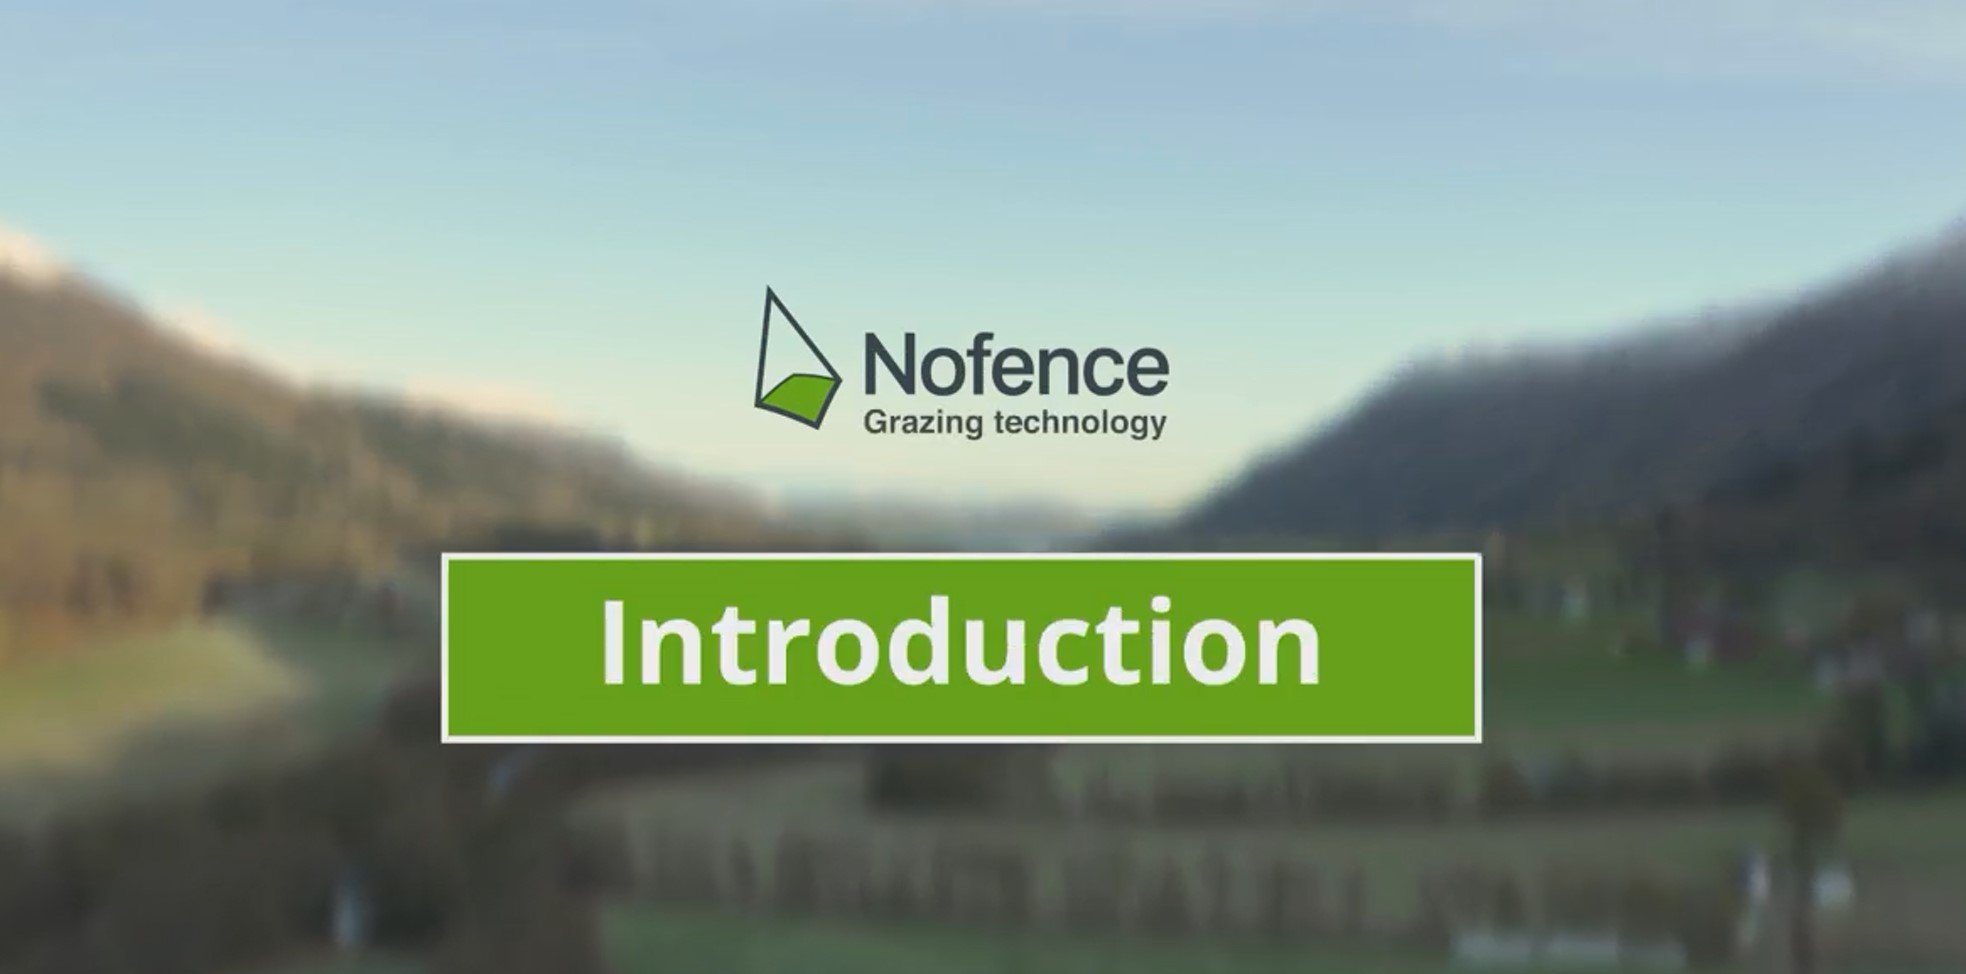 Introduction to Nofence